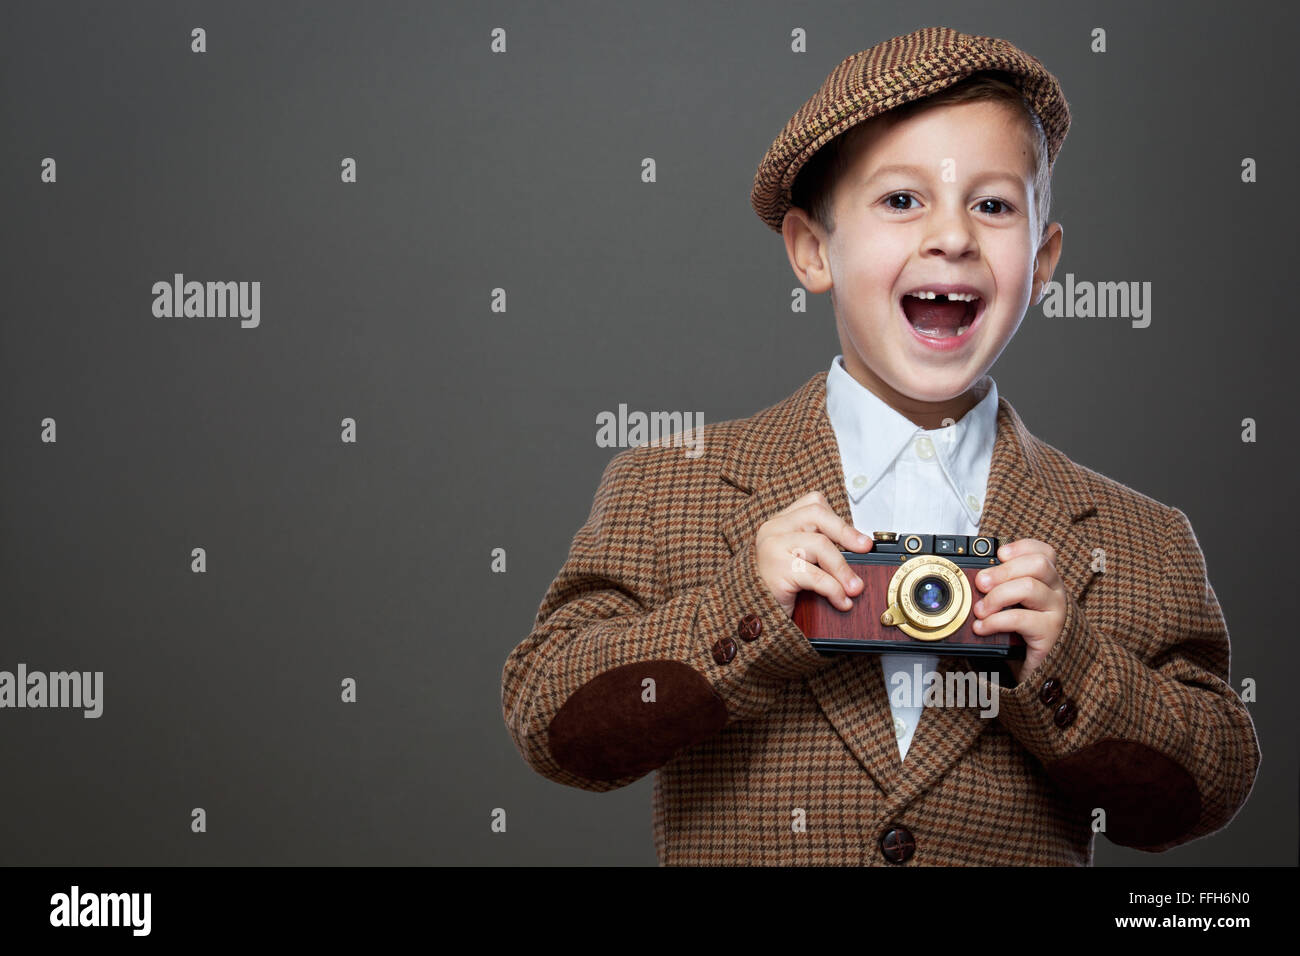 Cute boy with vintage photo camera on the grey background. ( Retro style.) Stock Photo